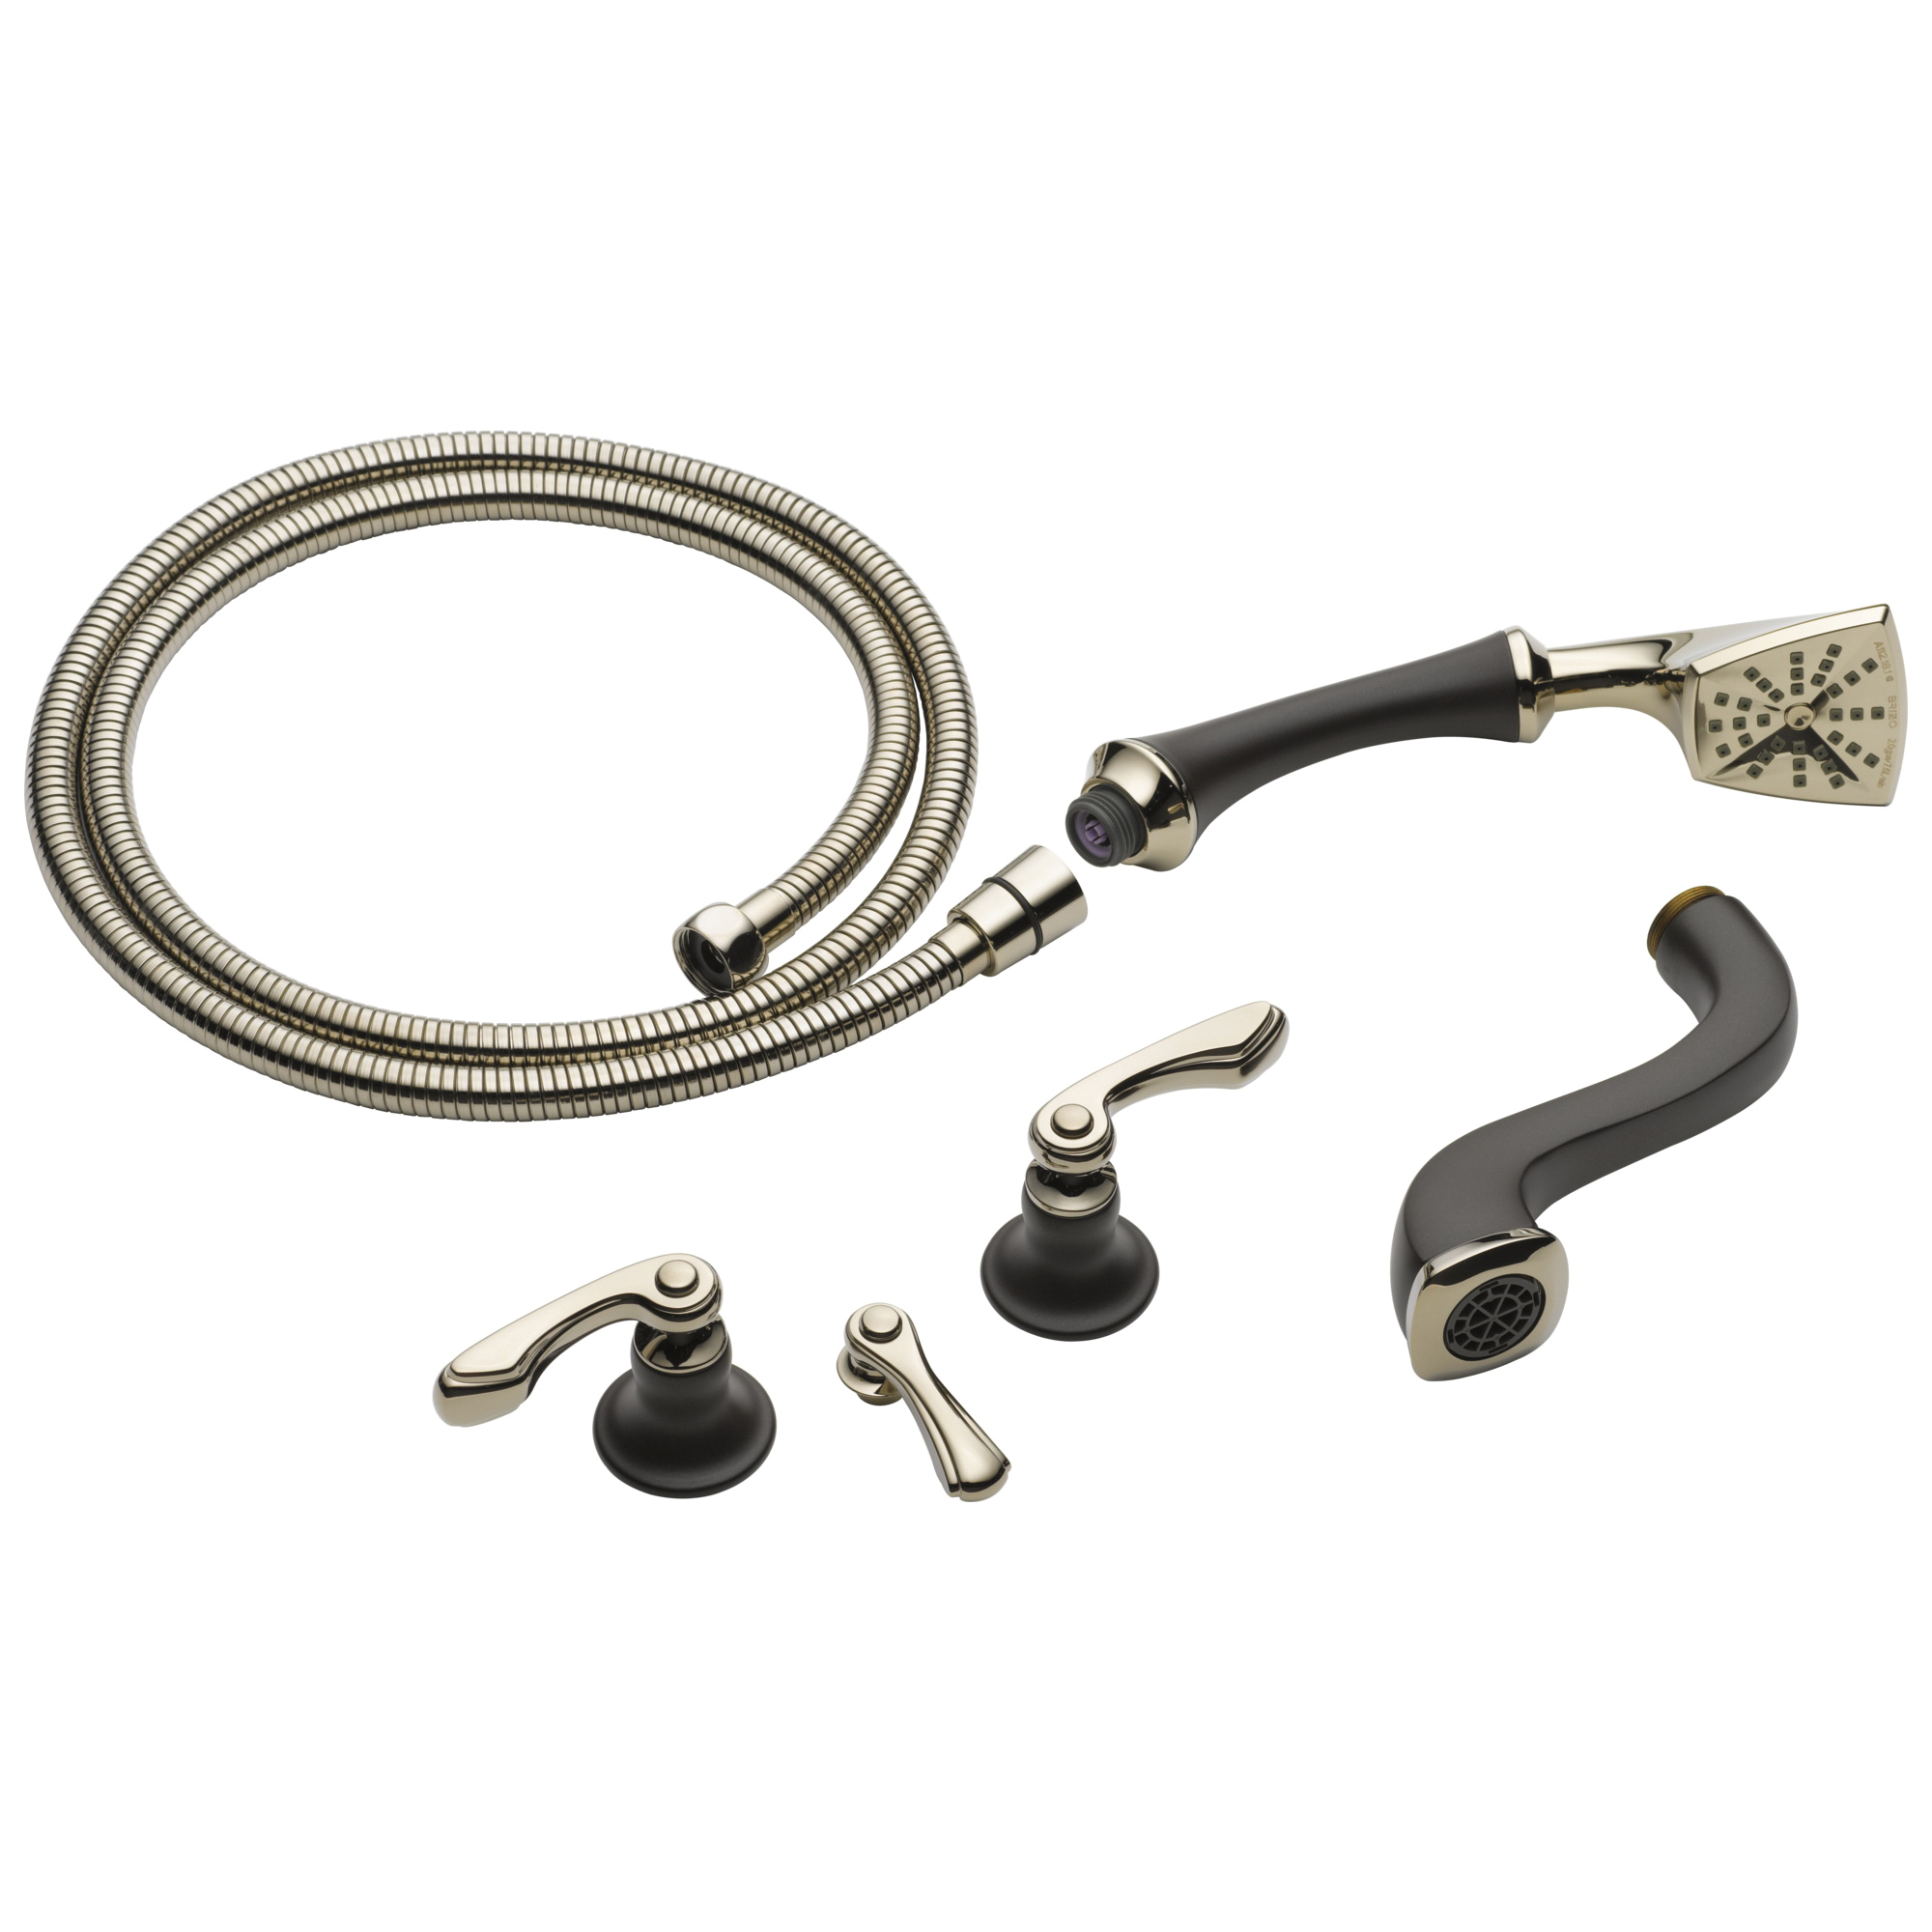 Brizo® T70385-PNCO Tub Filler Trim Kit, Charlotte®, 2 gpm Flow Rate, 8 in Center, Cocoa Bronze/Polished Nickel, 2 Handles, Domestic